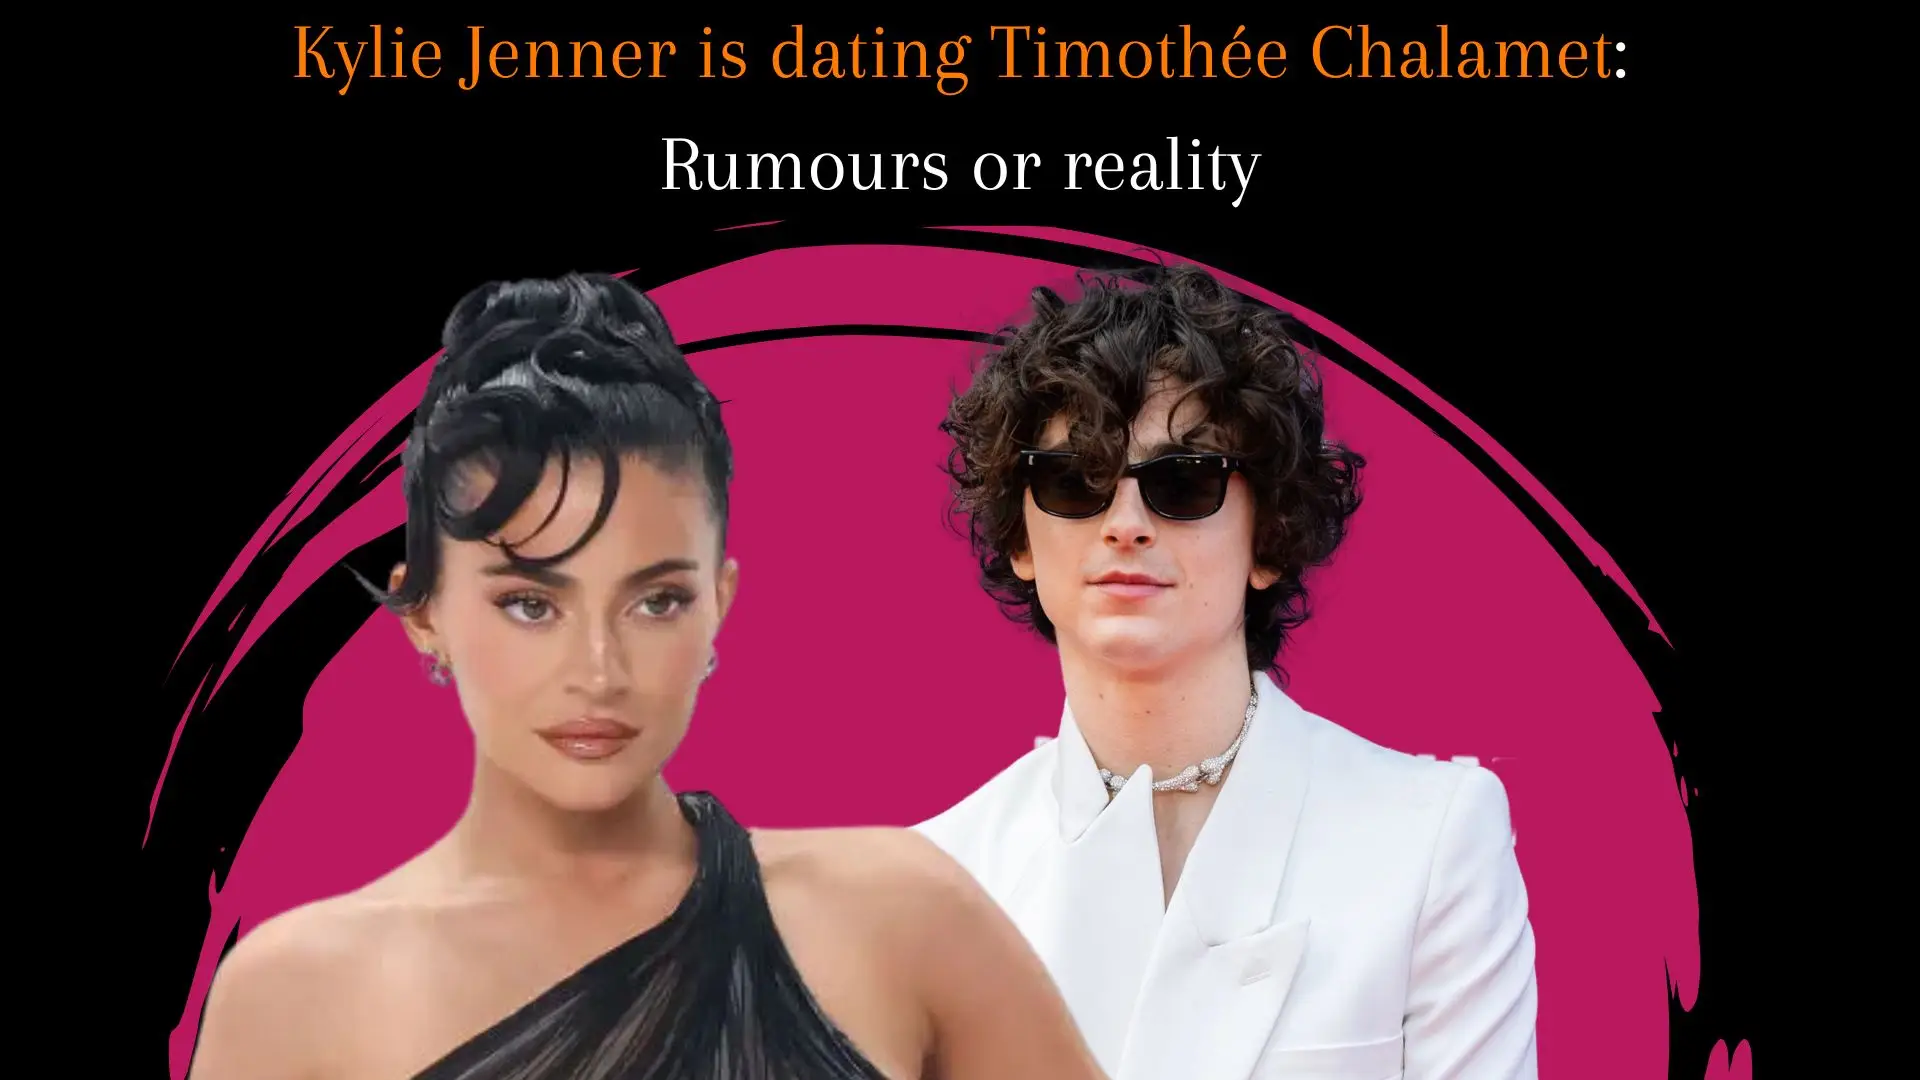 Kylie Jenner is dating Timothée Chalamet: Rumours or reality